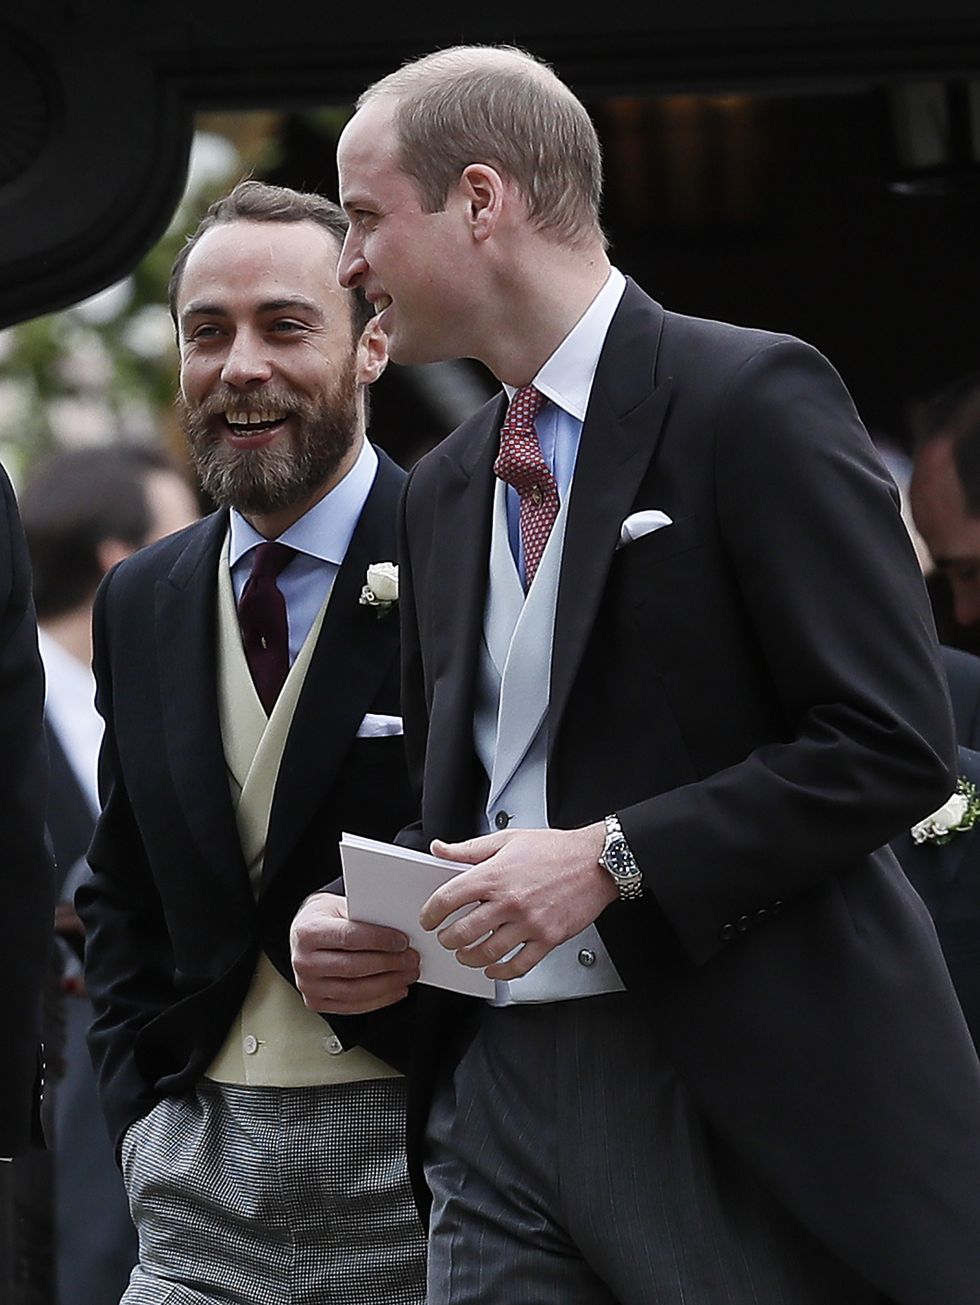 ENGLEFIELD, ENGLAND - MAY 20:  Britain's Prince William, right, talks to James Middleton after the wedding of Pippa Middleton and James Matthews at St Mark's Church on May 20, 2017 in in Englefield, England.  Middleton, the sister of Catherine, Duchess of Cambridge married hedge fund manager James Matthews in a ceremony Saturday where her niece and nephew Prince George and Princess Charlotte was in the wedding party, along with sister Kate and princes Harry and William. (Photo by Kirsty Wigglesworth - WPA Pool/Getty Images)